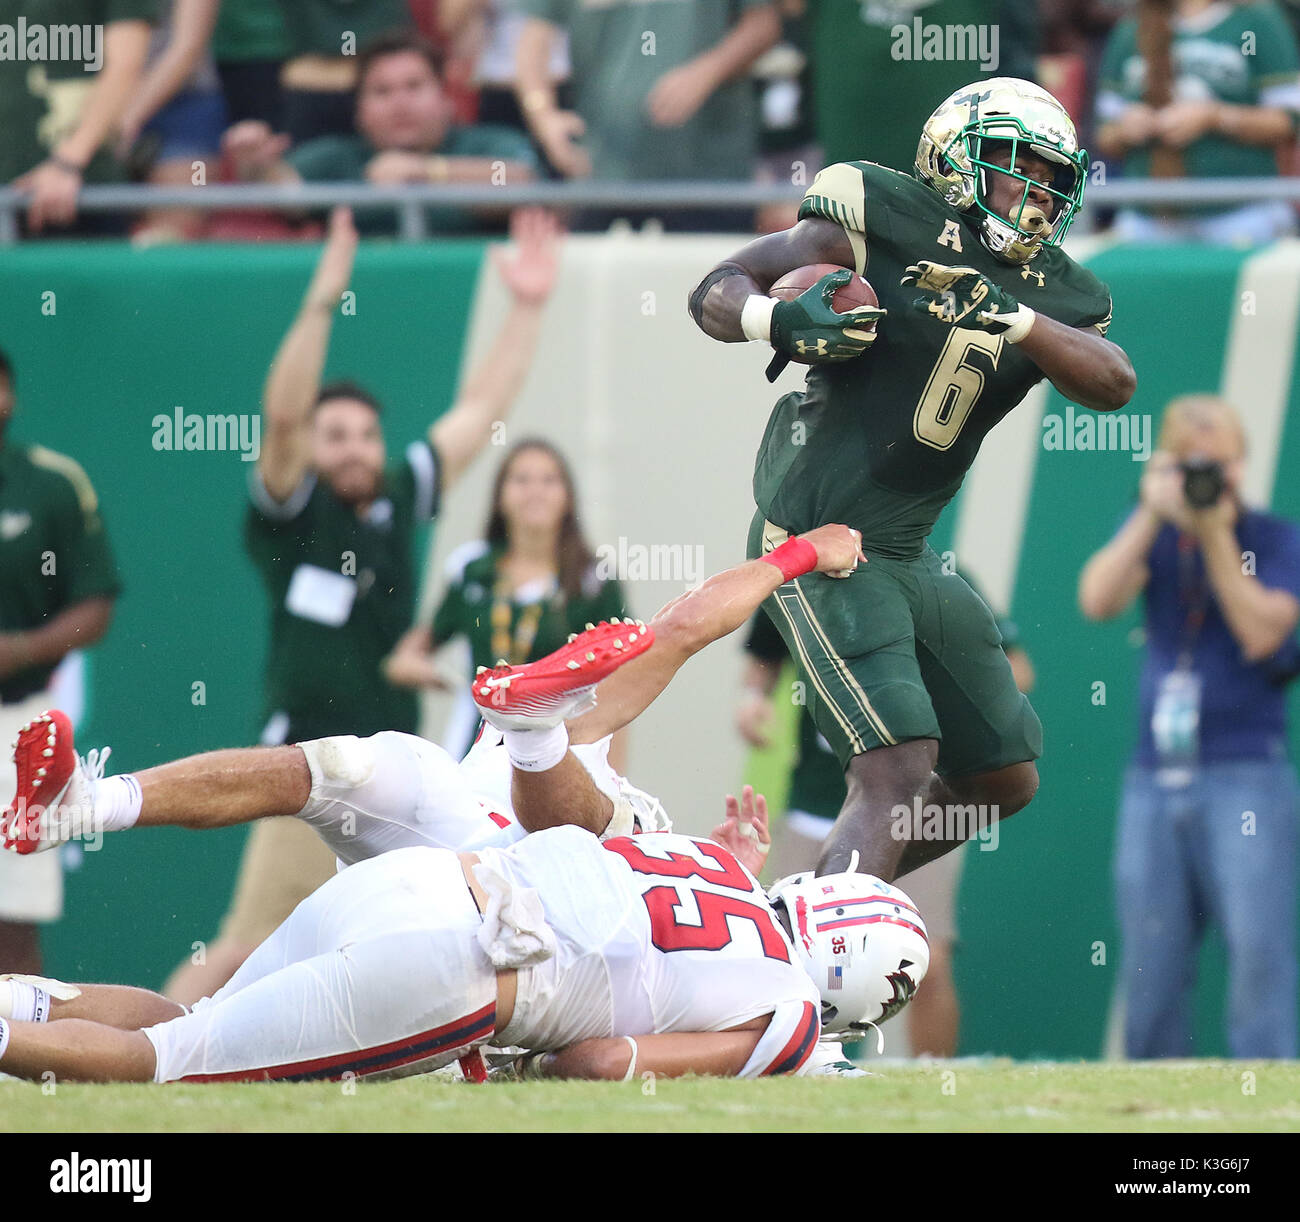 City, Florida, USA. 2nd Sep, 2017. OCTAVIO JONES | Times .South Florida running back Darius Tice (2) breaks away for a first down during the fourth quarter at Raymond James Stadium in Tampa on Saturday, September 2, 2017. The USF Bulls defeated the Stony Brook Seawolves 31 to 17. Credit: Octavio Jones/Tampa Bay Times/ZUMA Wire/Alamy Live News Stock Photo